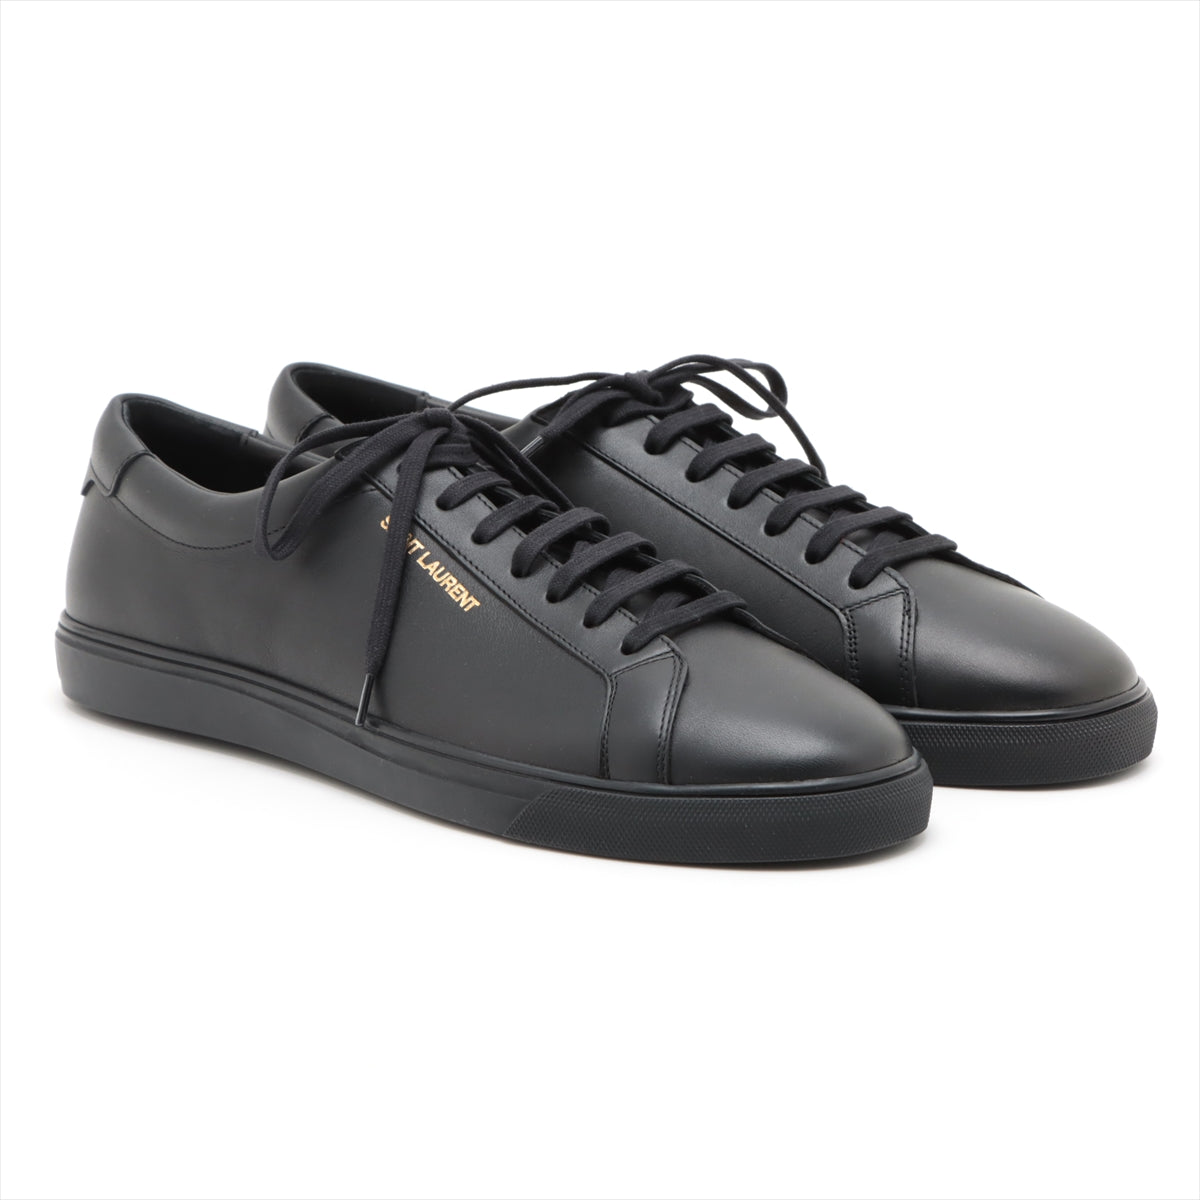 Saint Laurent Paris Leather Sneakers 46 Men's Black 606833 Is there a replacement string